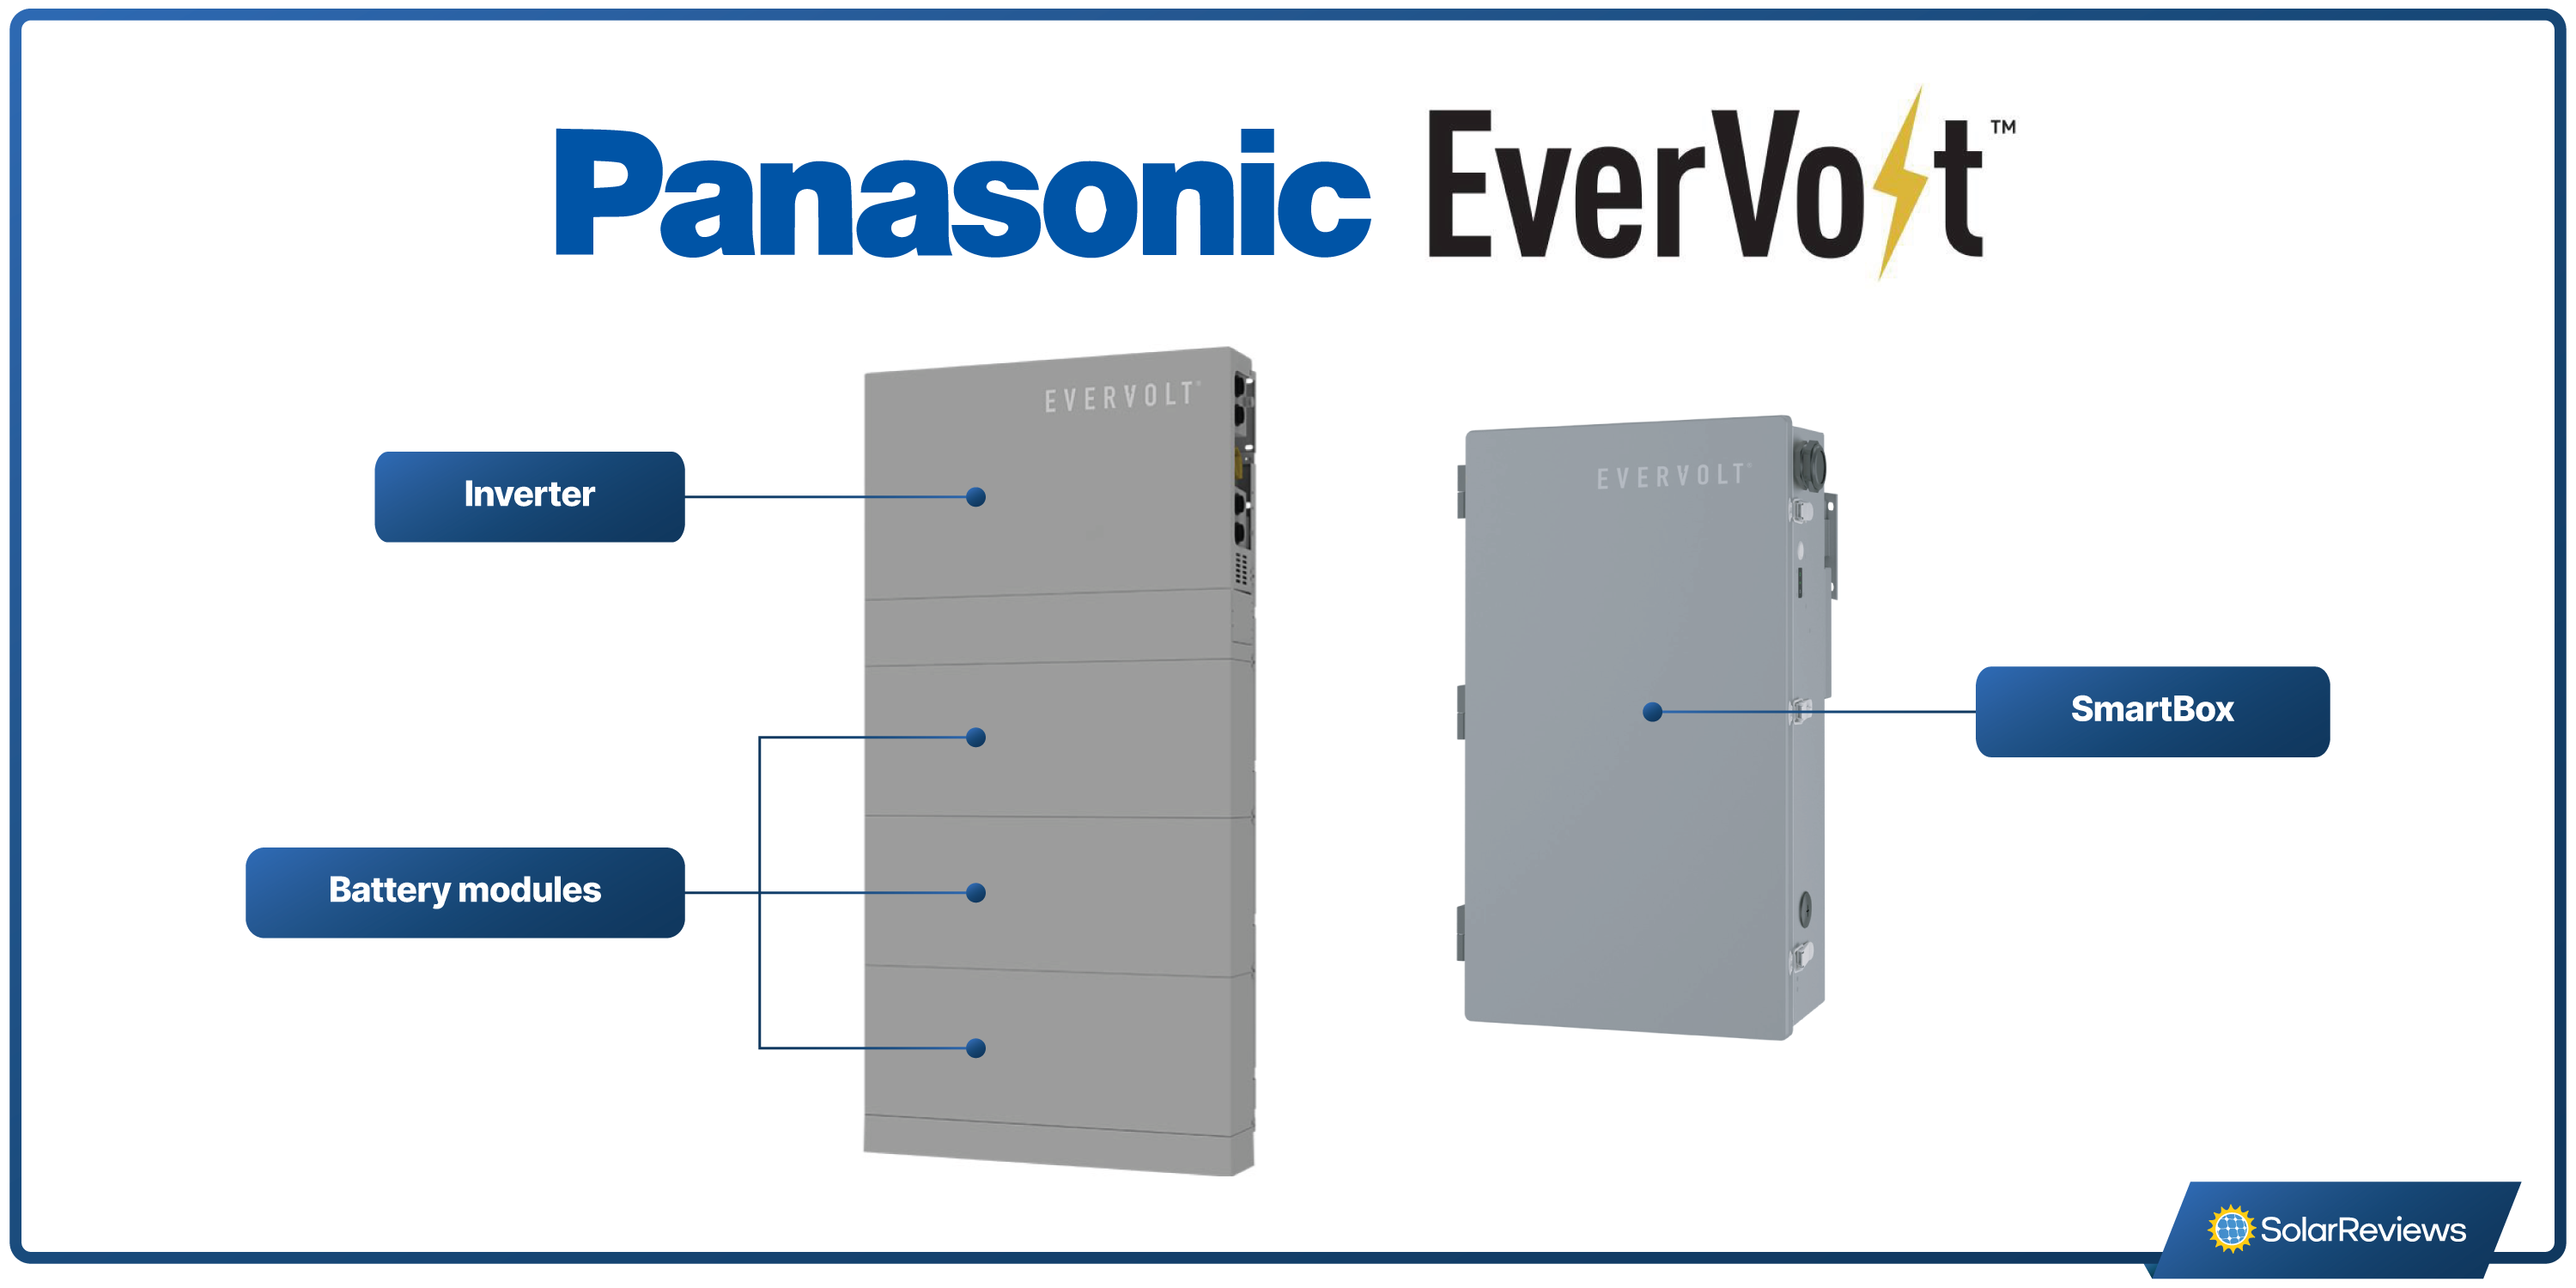 Image showing the Panasonic EverVolt Home Battery and SmartBox side by side, with different equipment labeled. 